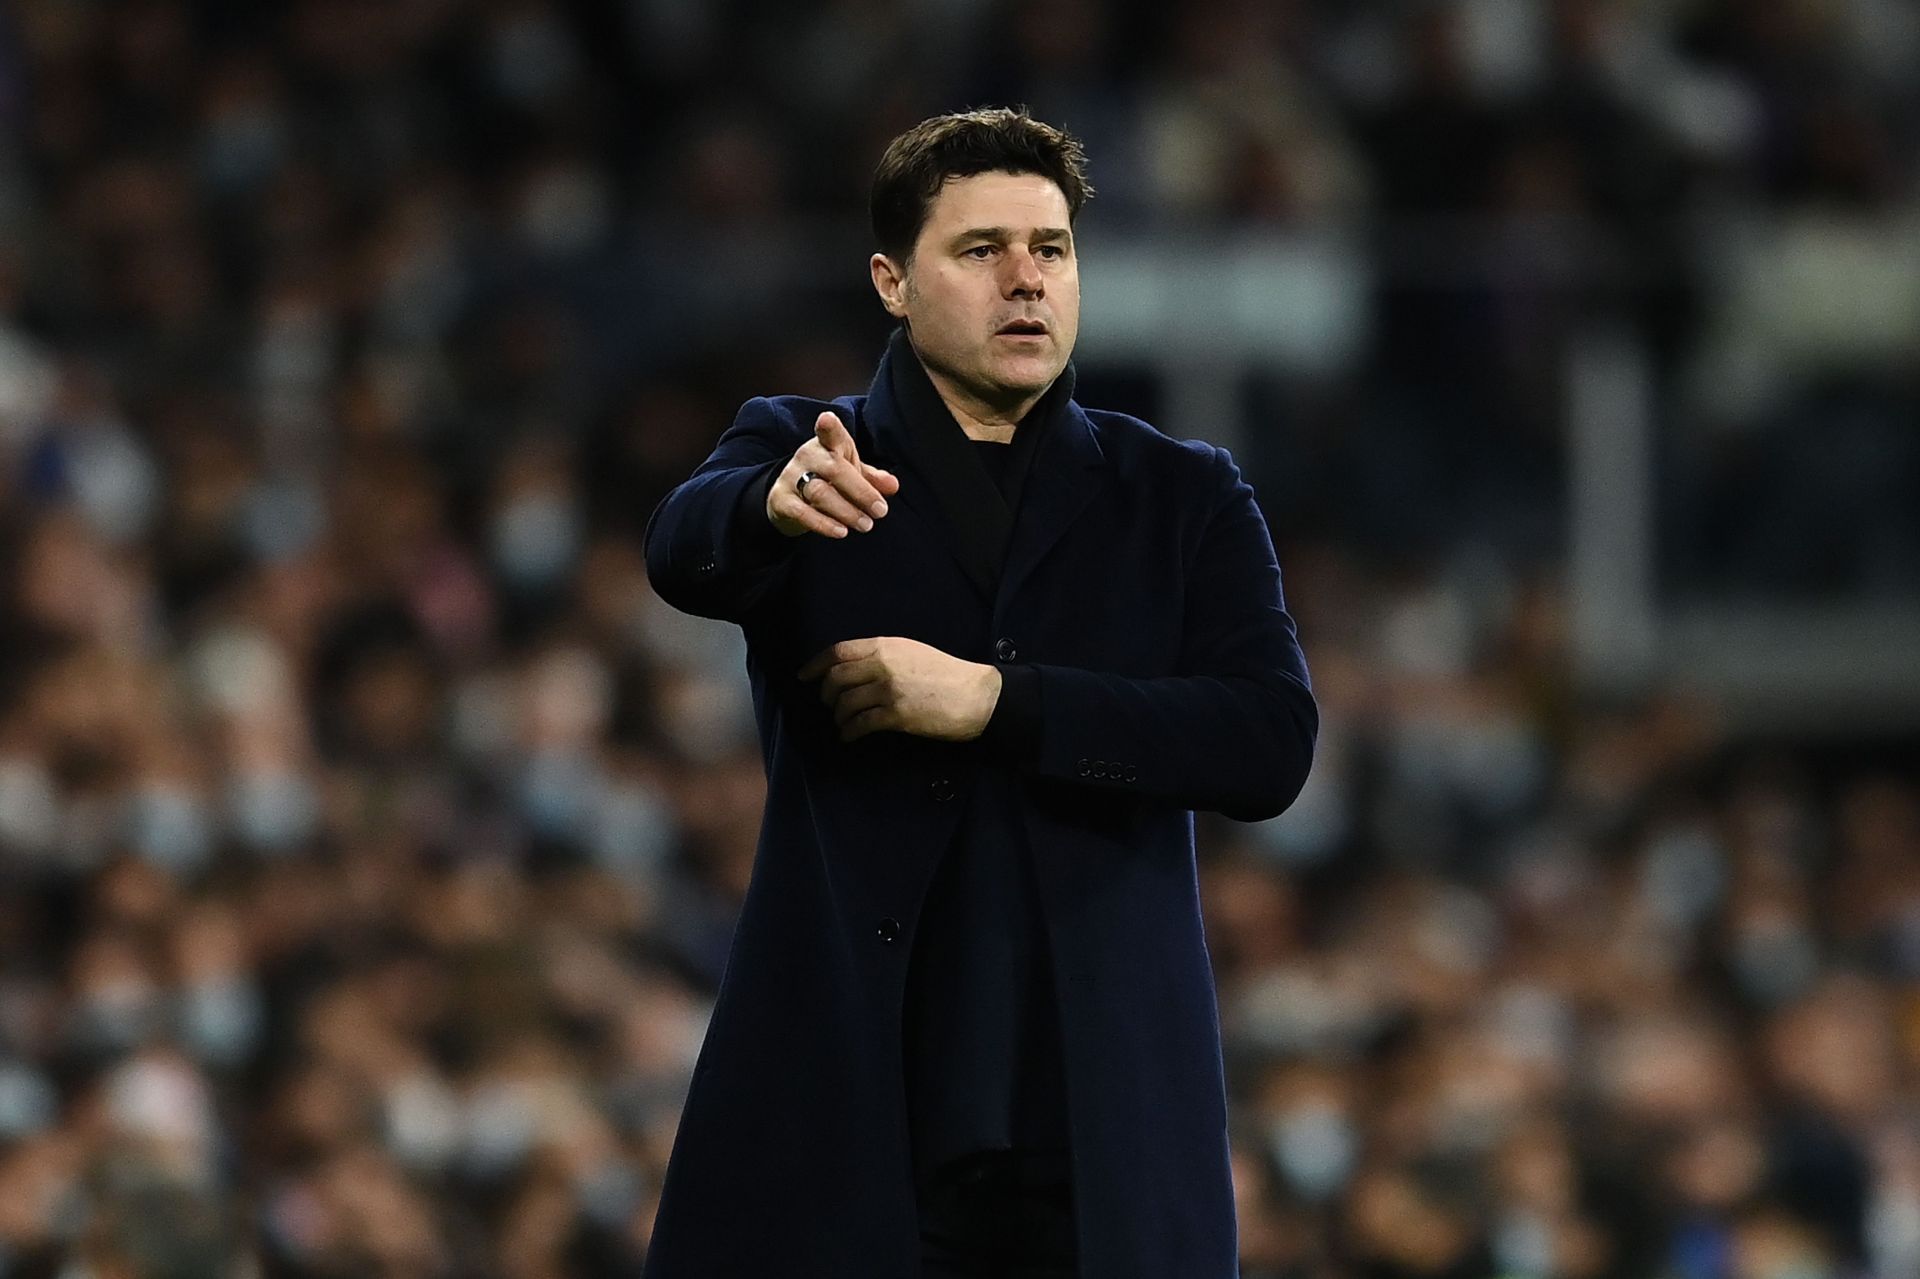 Mauricio Pochettino is among the contenders for the Manchester United job.